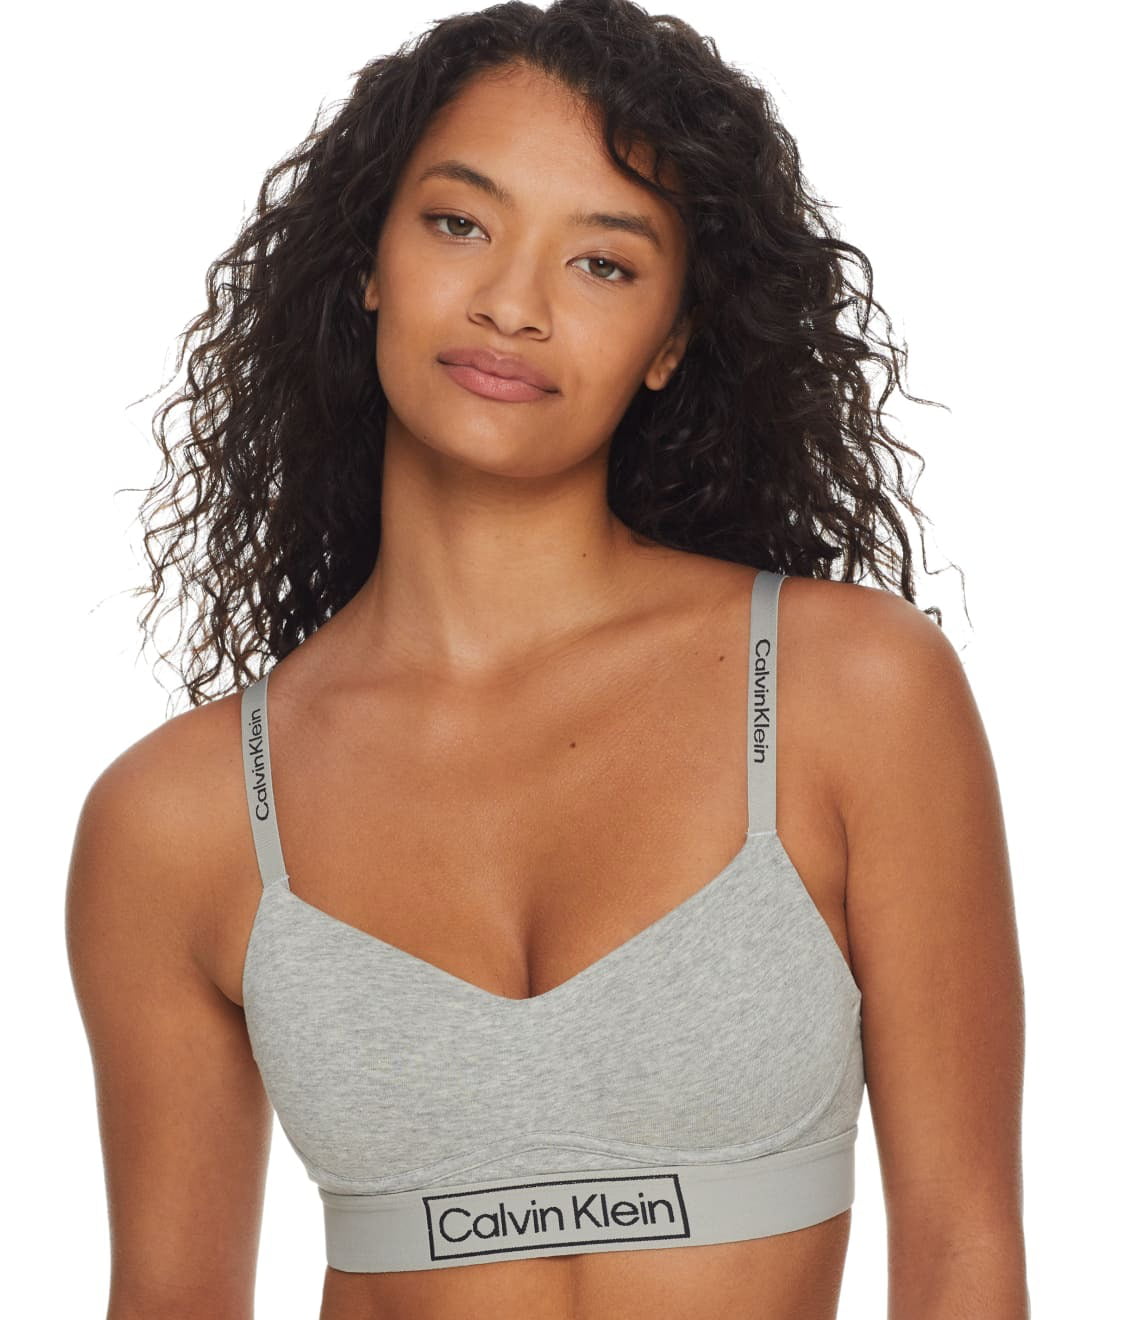 Calvin Klein Small Lightly Lined Logo Bralette QP16680-020 Grey Heather New  $26